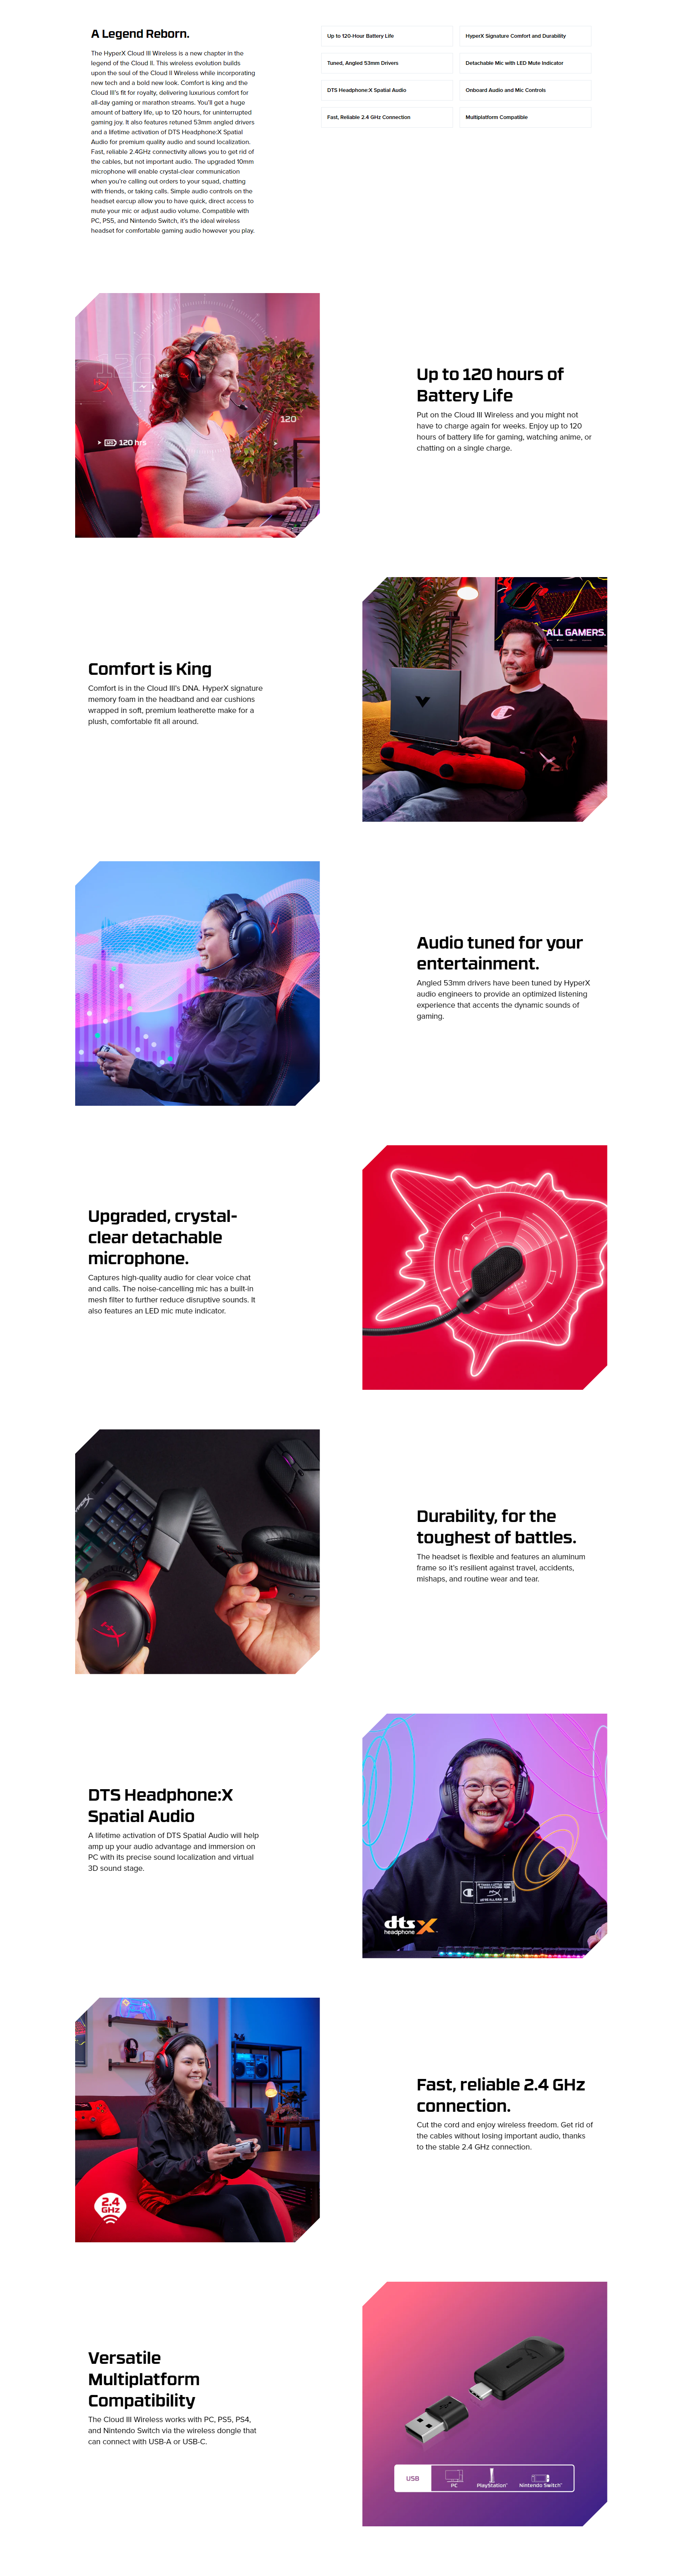 A large marketing image providing additional information about the product HyperX Cloud III - Wireless Gaming Headset (Black) - Additional alt info not provided